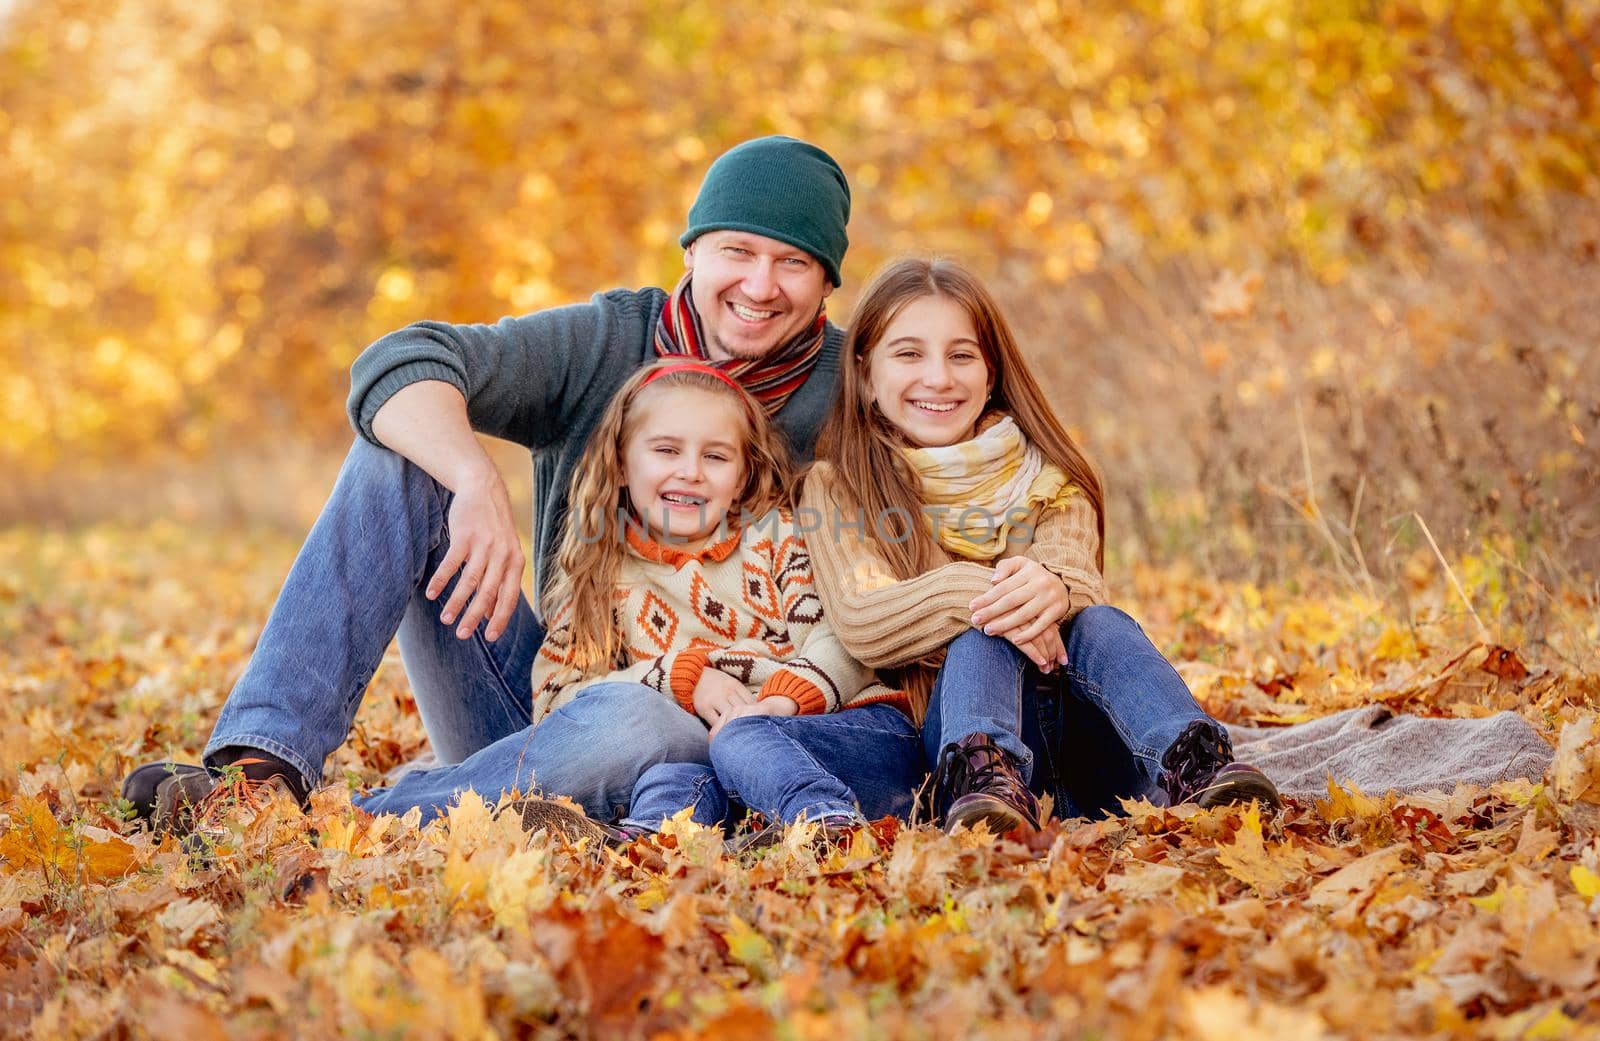 Daughters and father sitting in autumn leaves